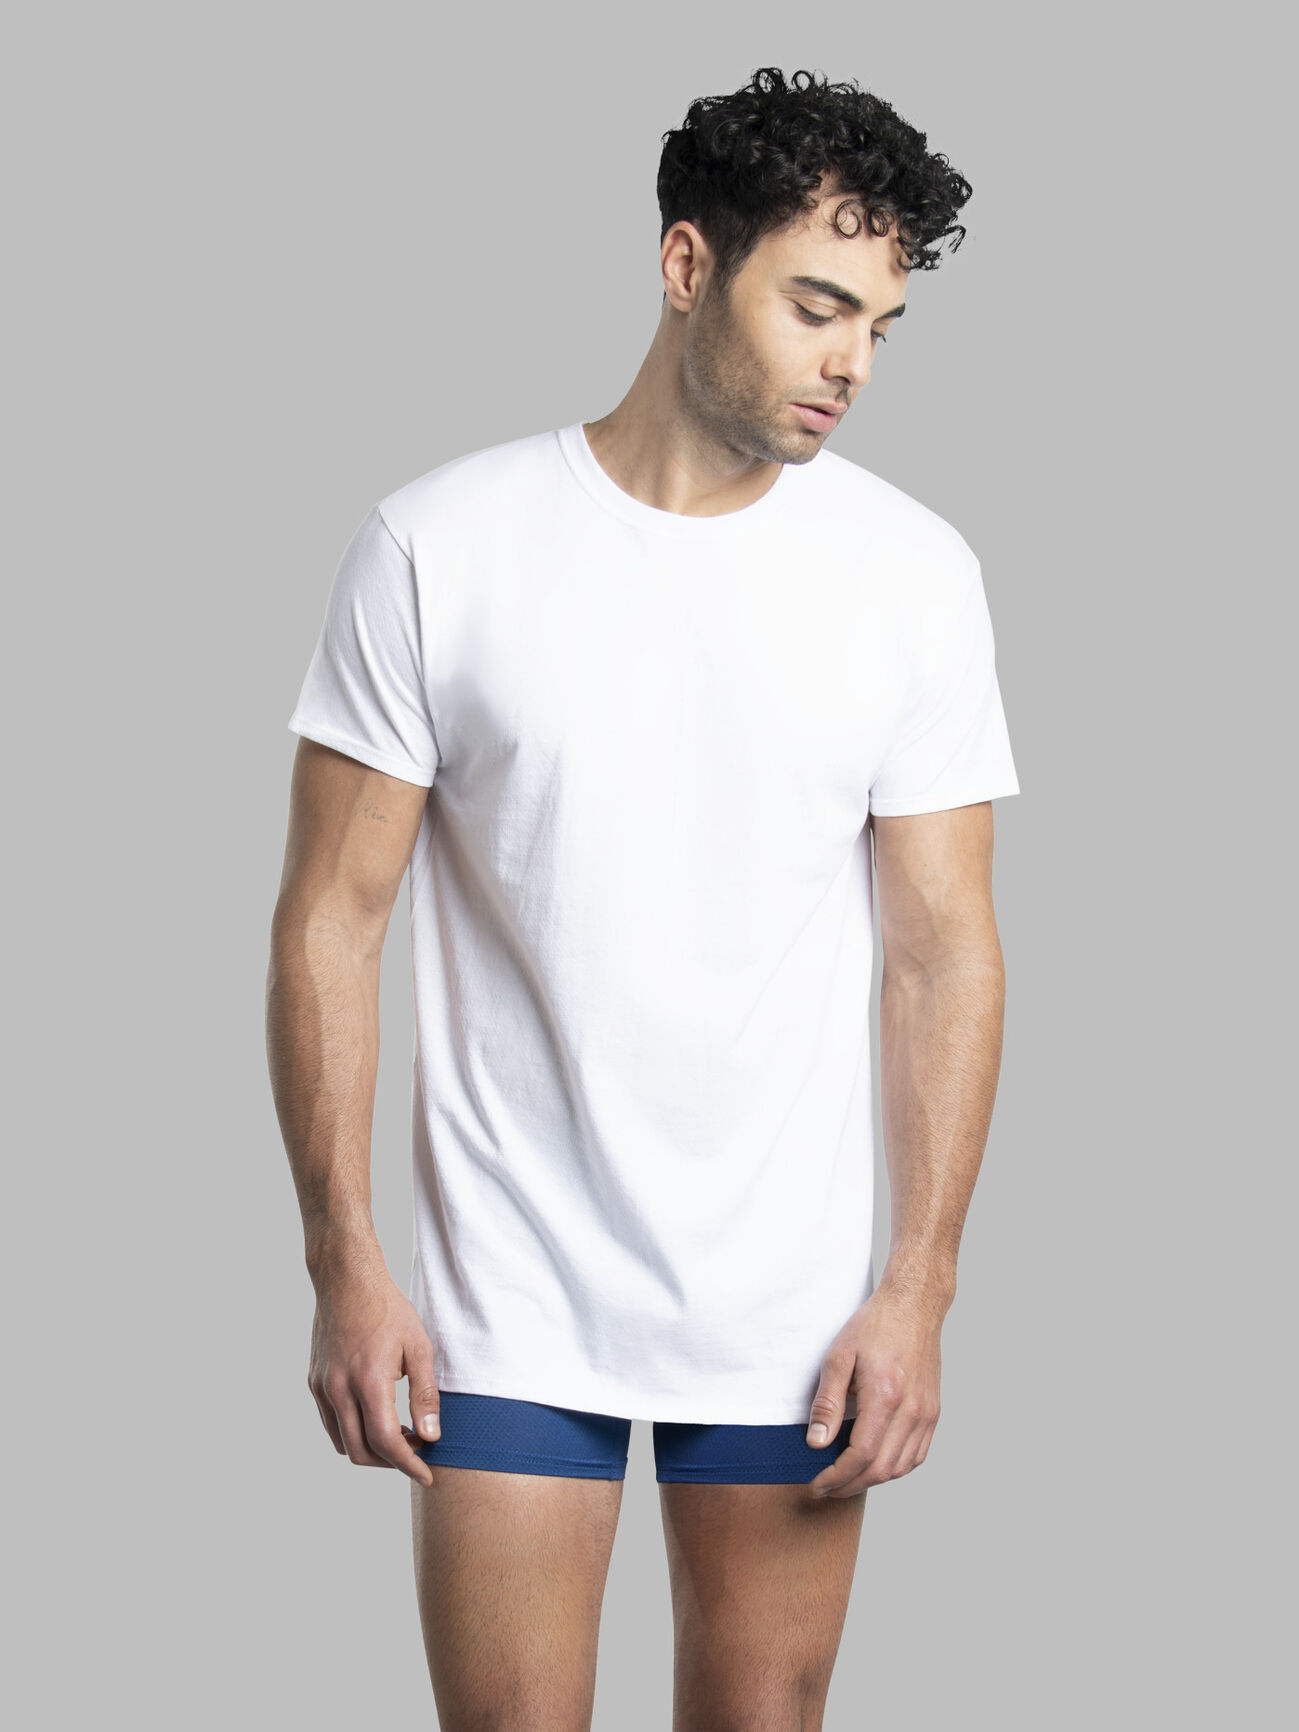 Fruit of the Loom Men's Cooling Undershirts, Quick Dry & Moisture Wicking